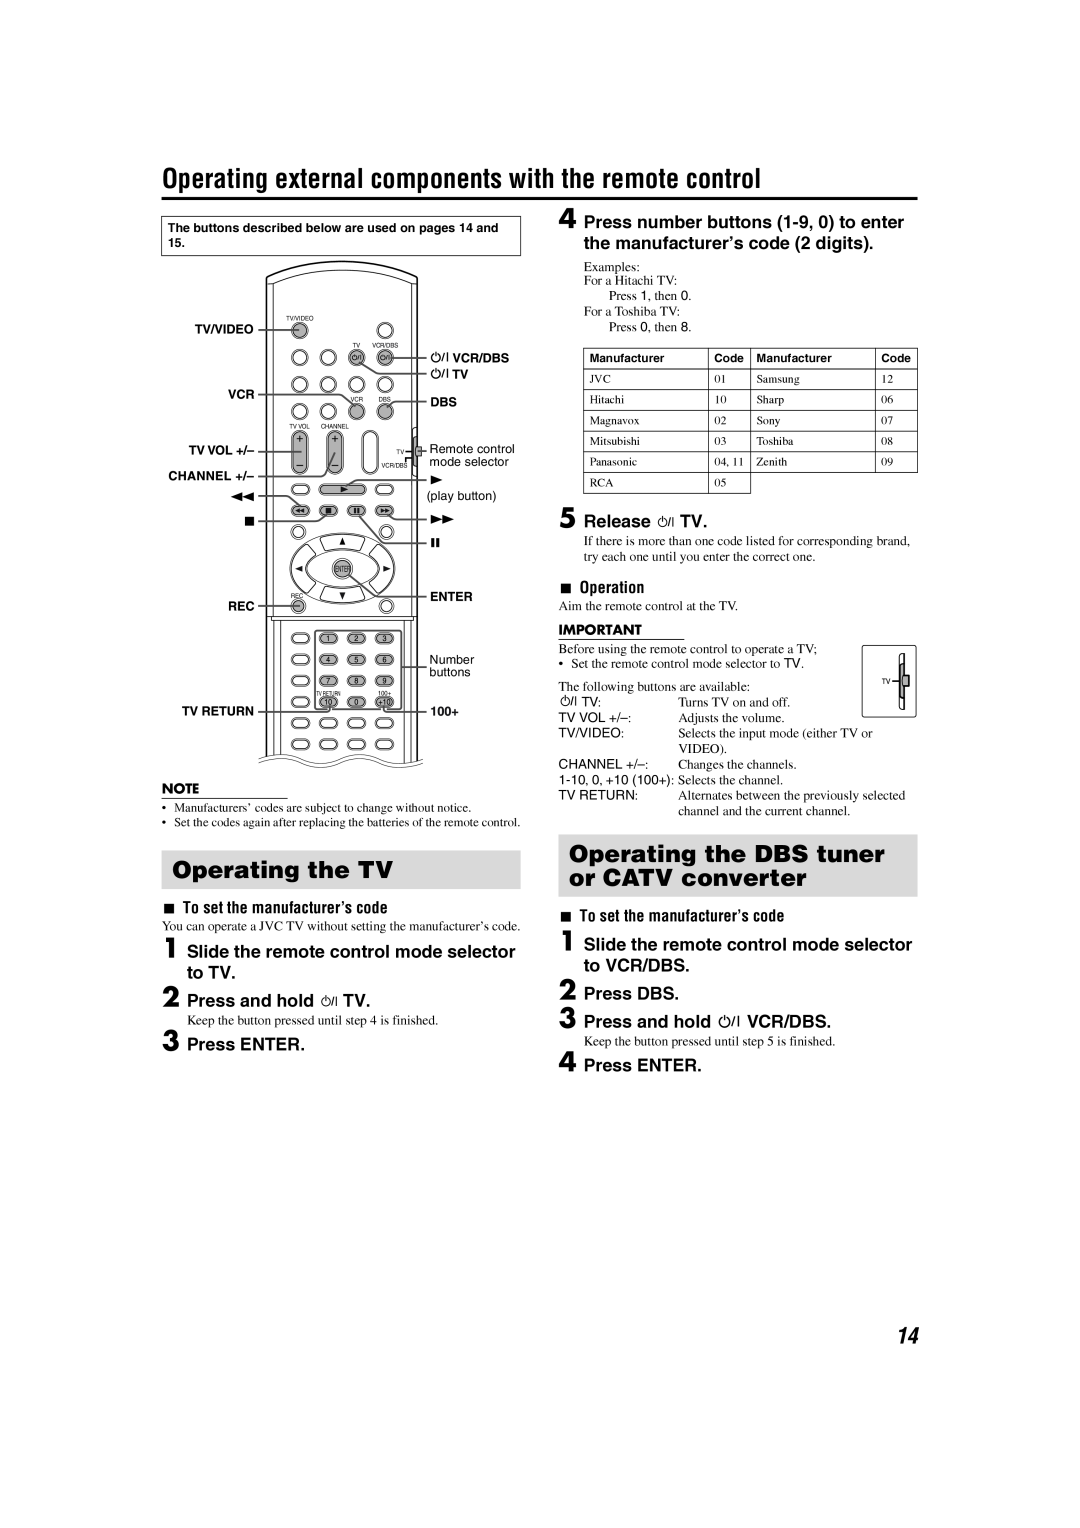 JVC TH-C6 manual Operating the TV, Operating the DBS tuner or CATV converter, 1Slide the remote control mode selector to TV 